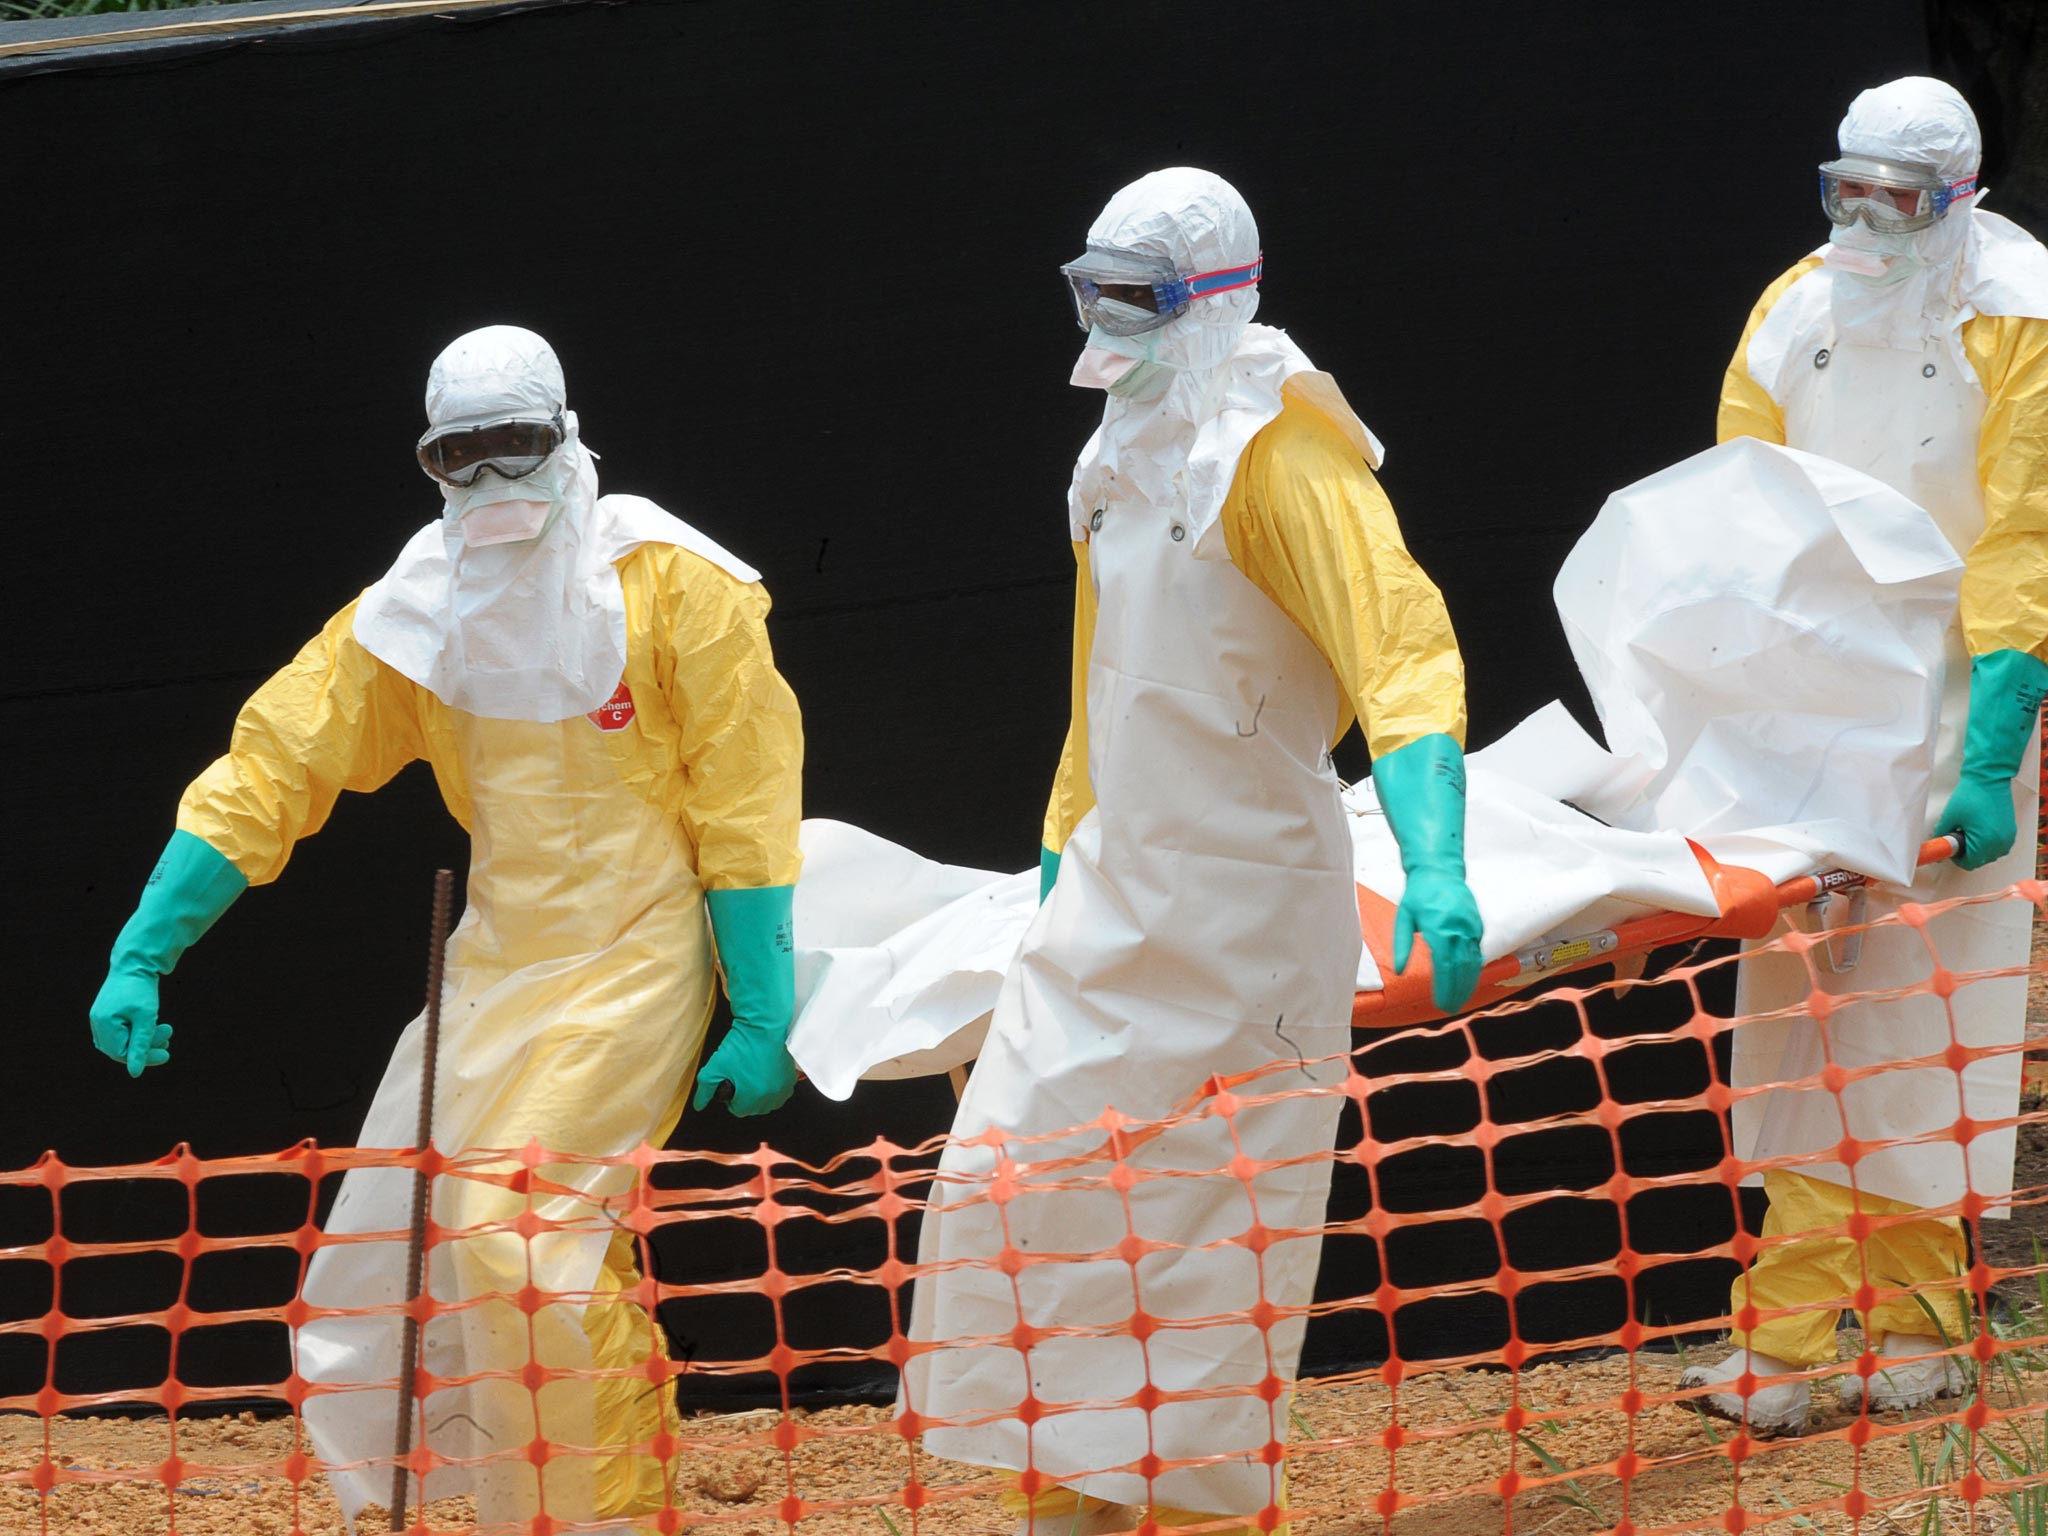 Médecins sans Frontières staff carry an Ebola victim’s body in Guinea this week